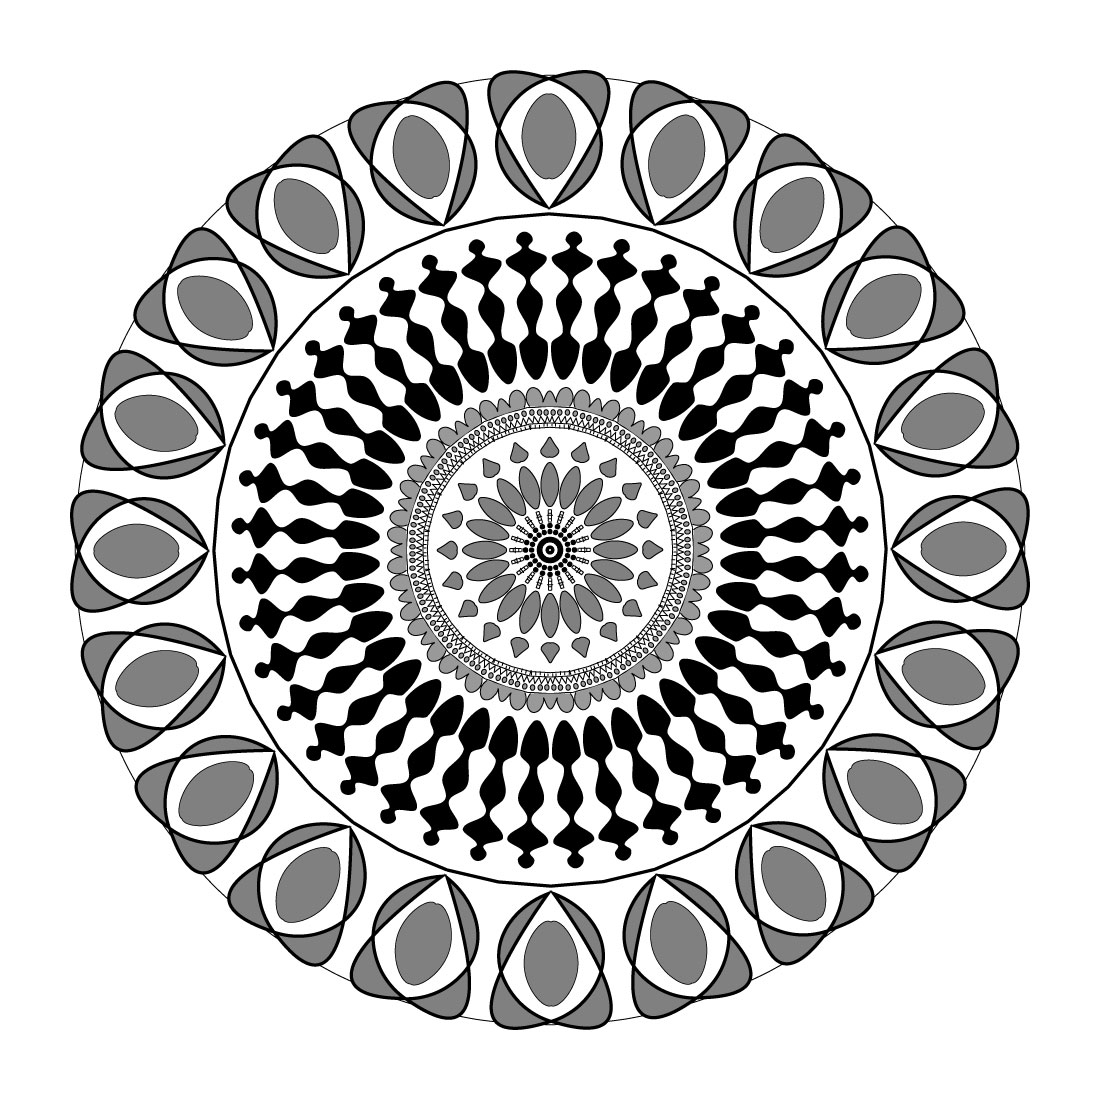 Mandala Art with Black rings and gray background preview image.